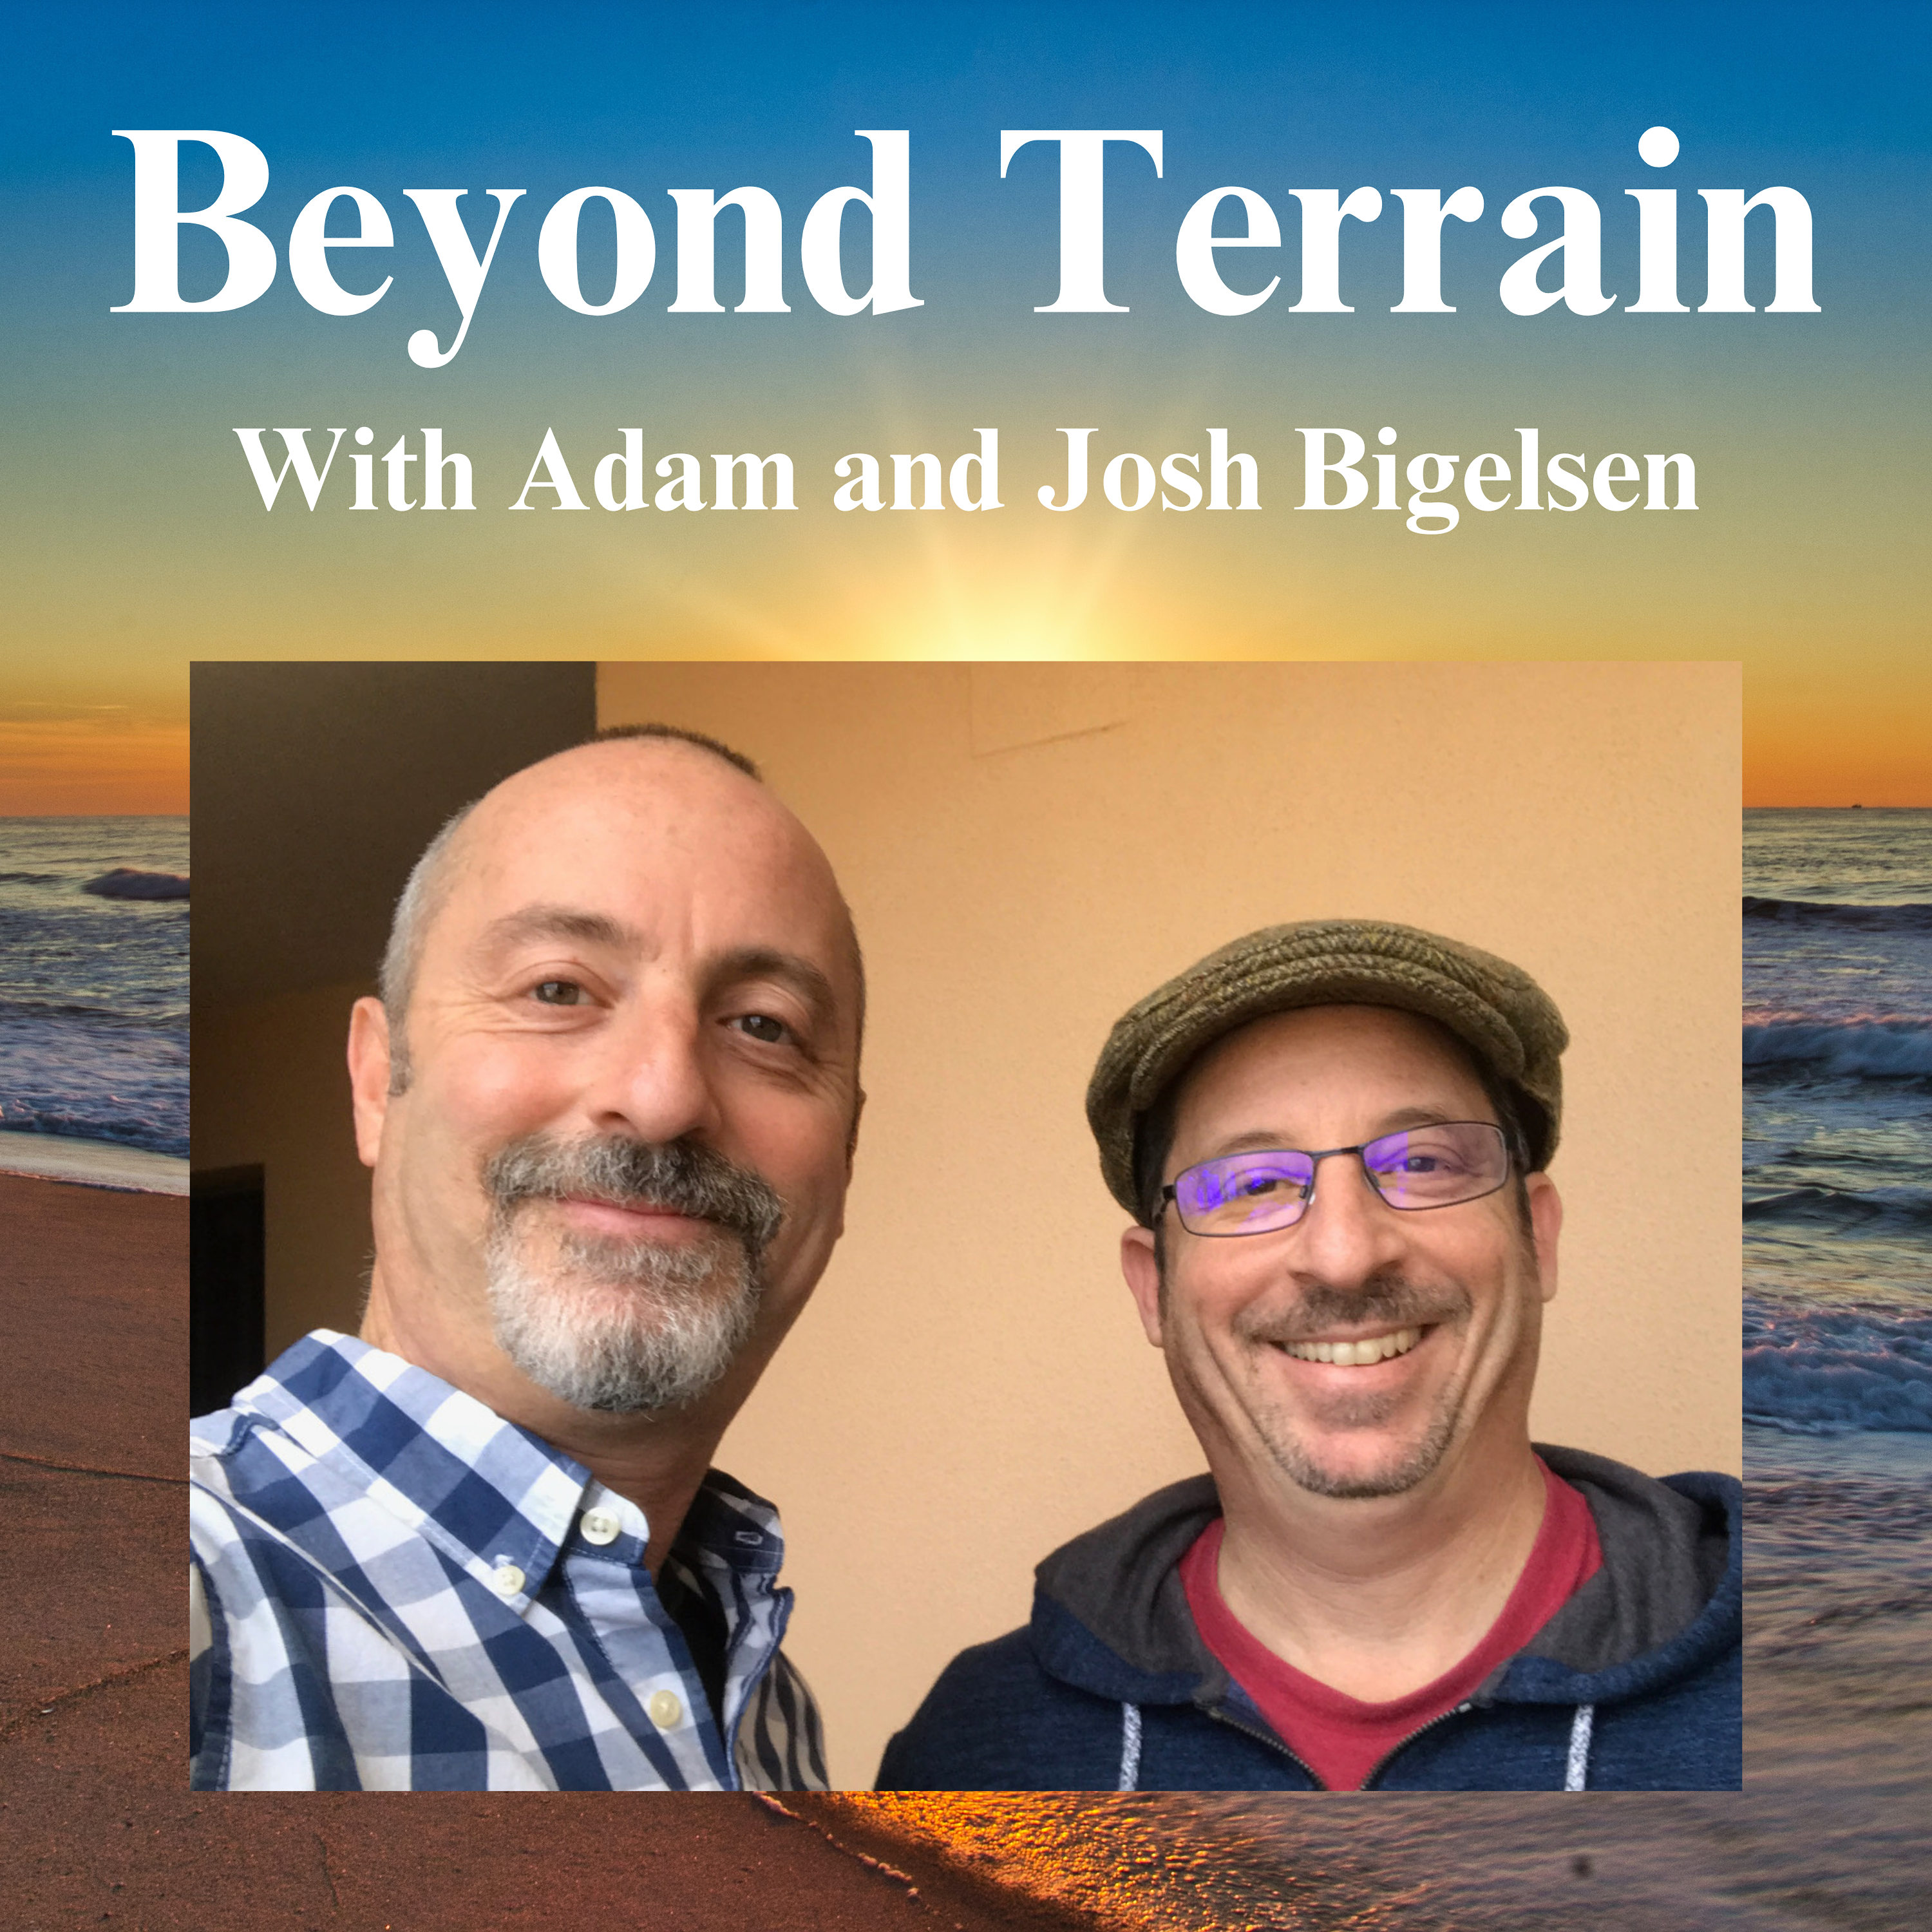 Adam and Josh Bigelsen on Darkfield Microscopy, Pleiomorphism, Problems in Live Blood Analysis, and so much more!